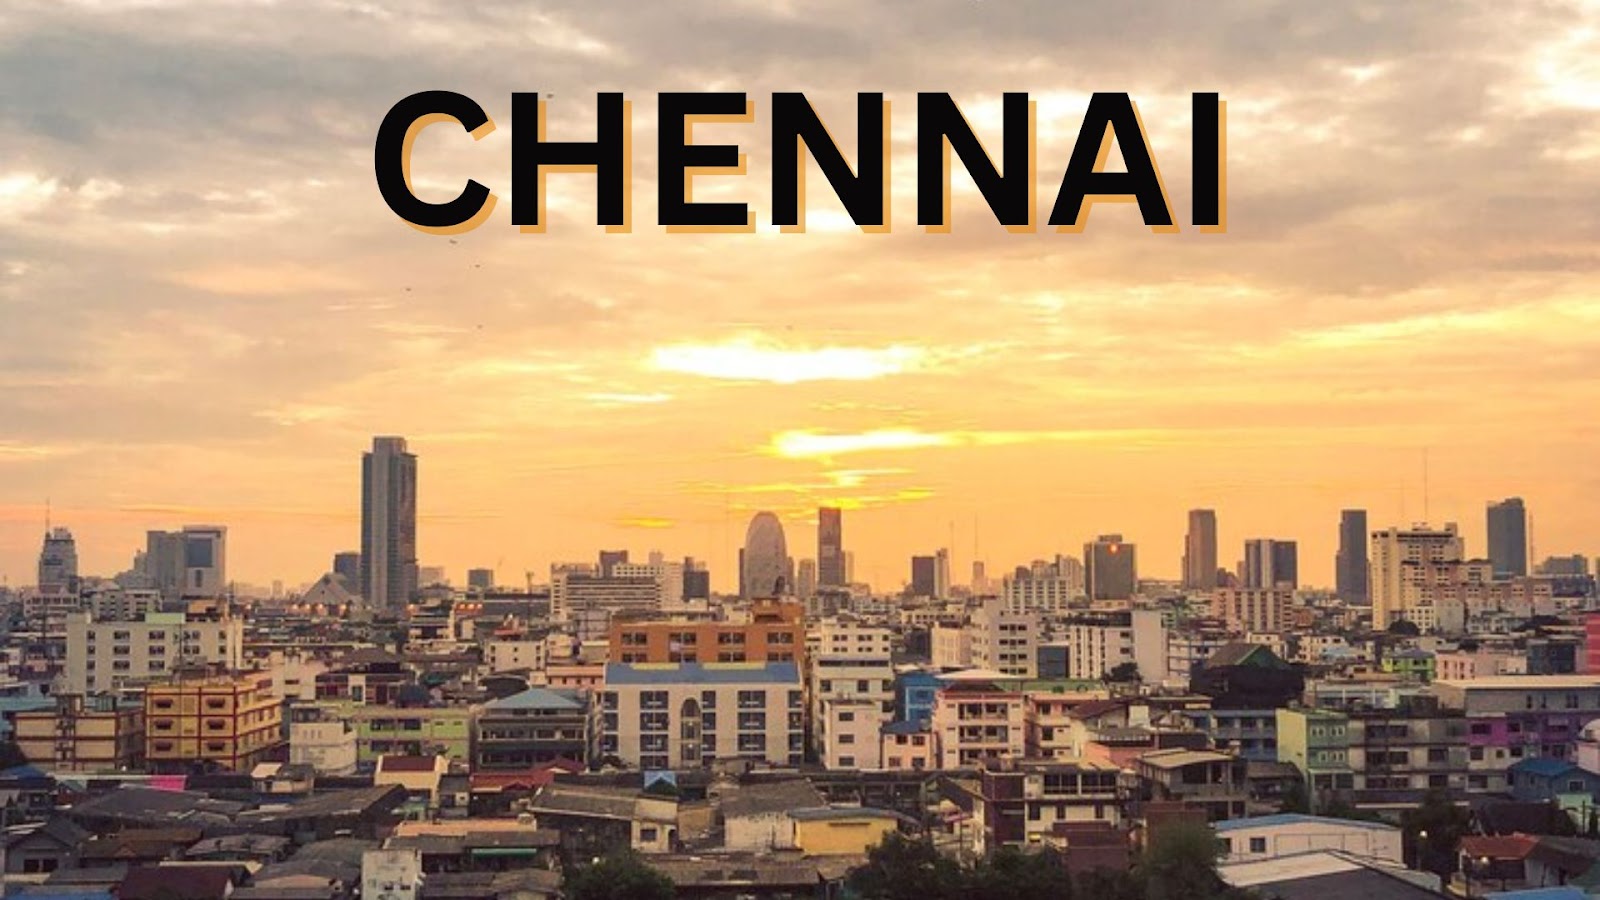 Chennai is known as a traditional and rich culture city.